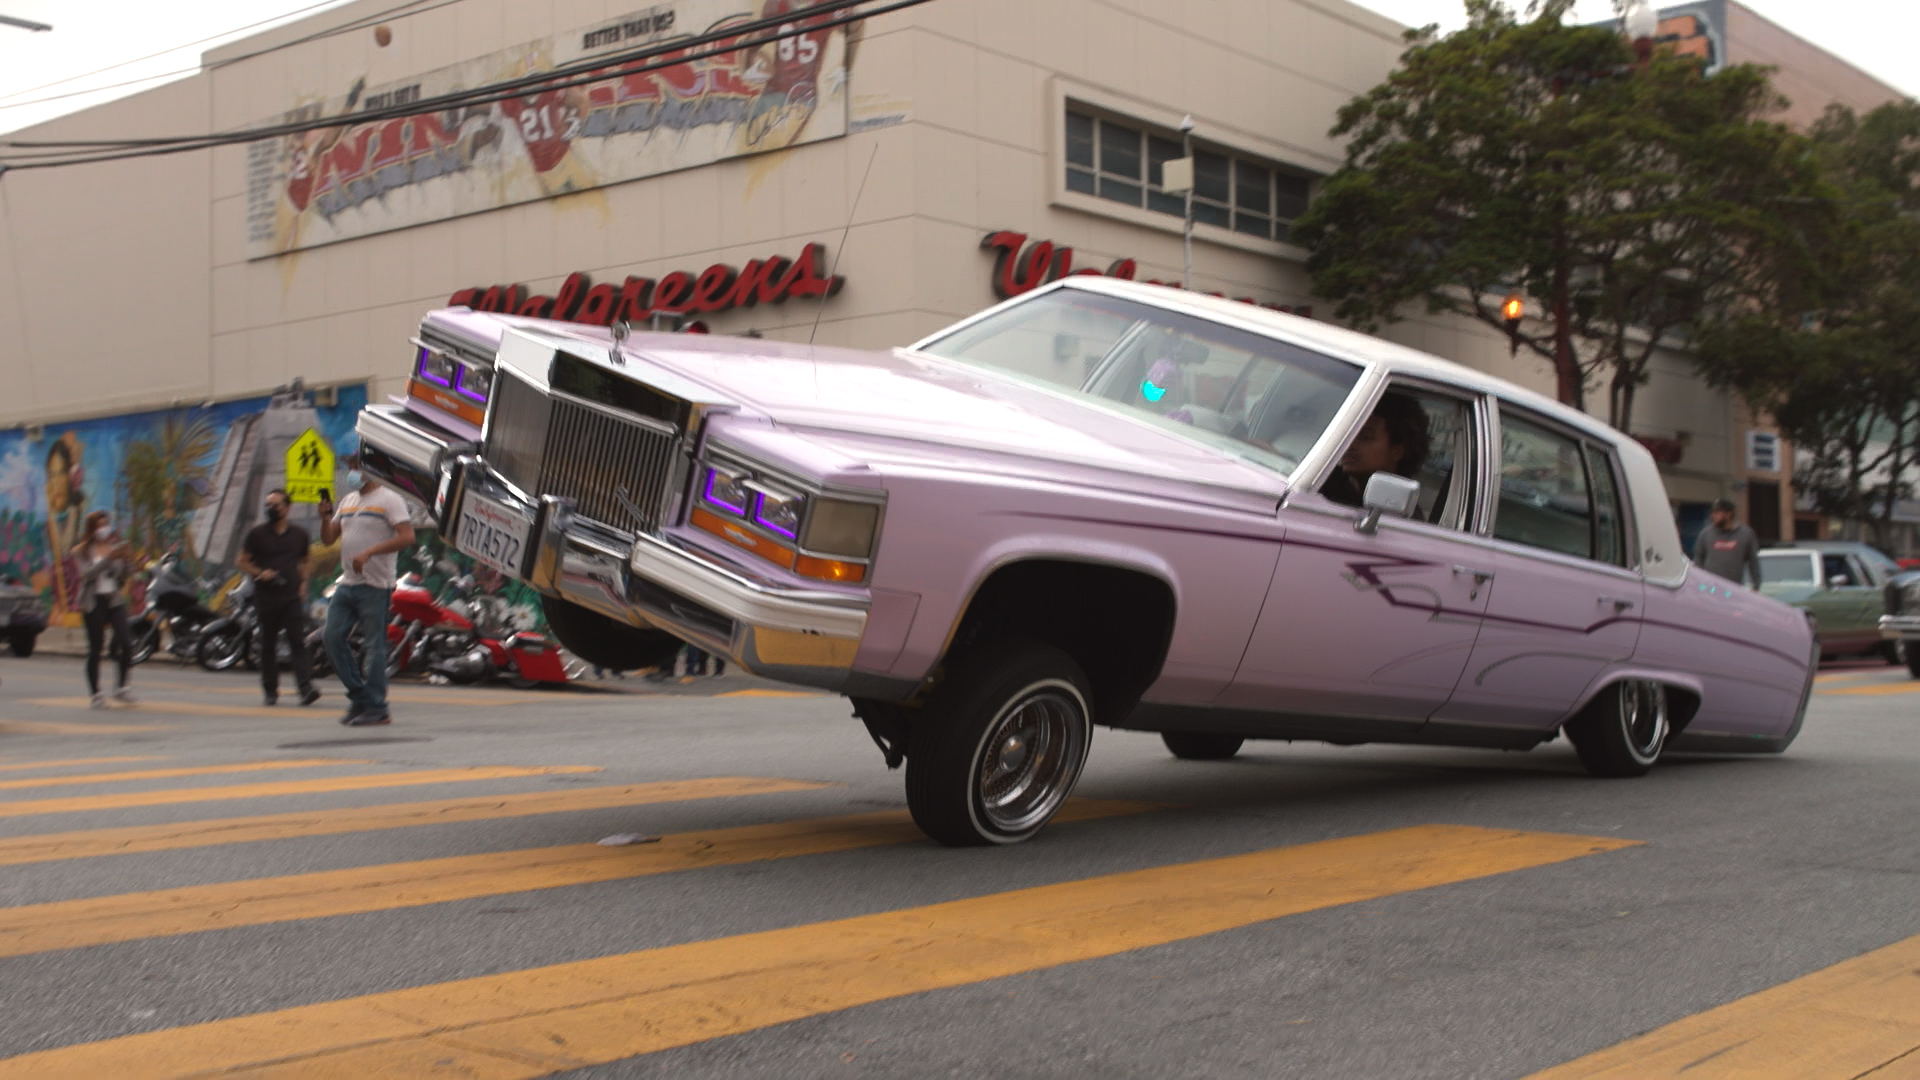 Watch: Hundreds of Lowriders Cruise Mission Street for Annual ‘King of the Streets’ Parade